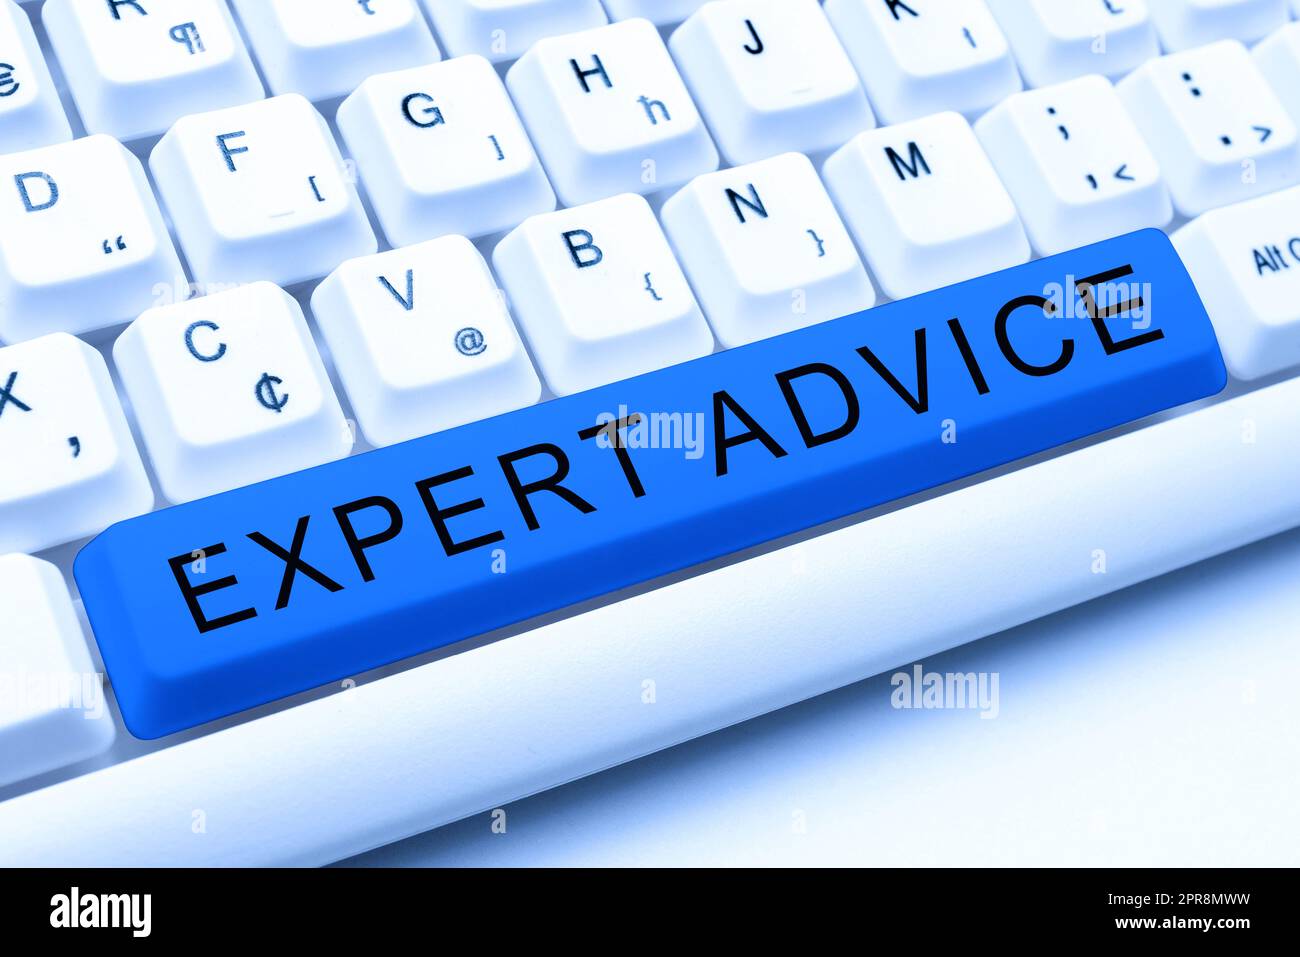 Writing displaying text Expert Advice. Business approach Sage Good Word Professional opinion Extensive skill Ace -48948 Stock Photo